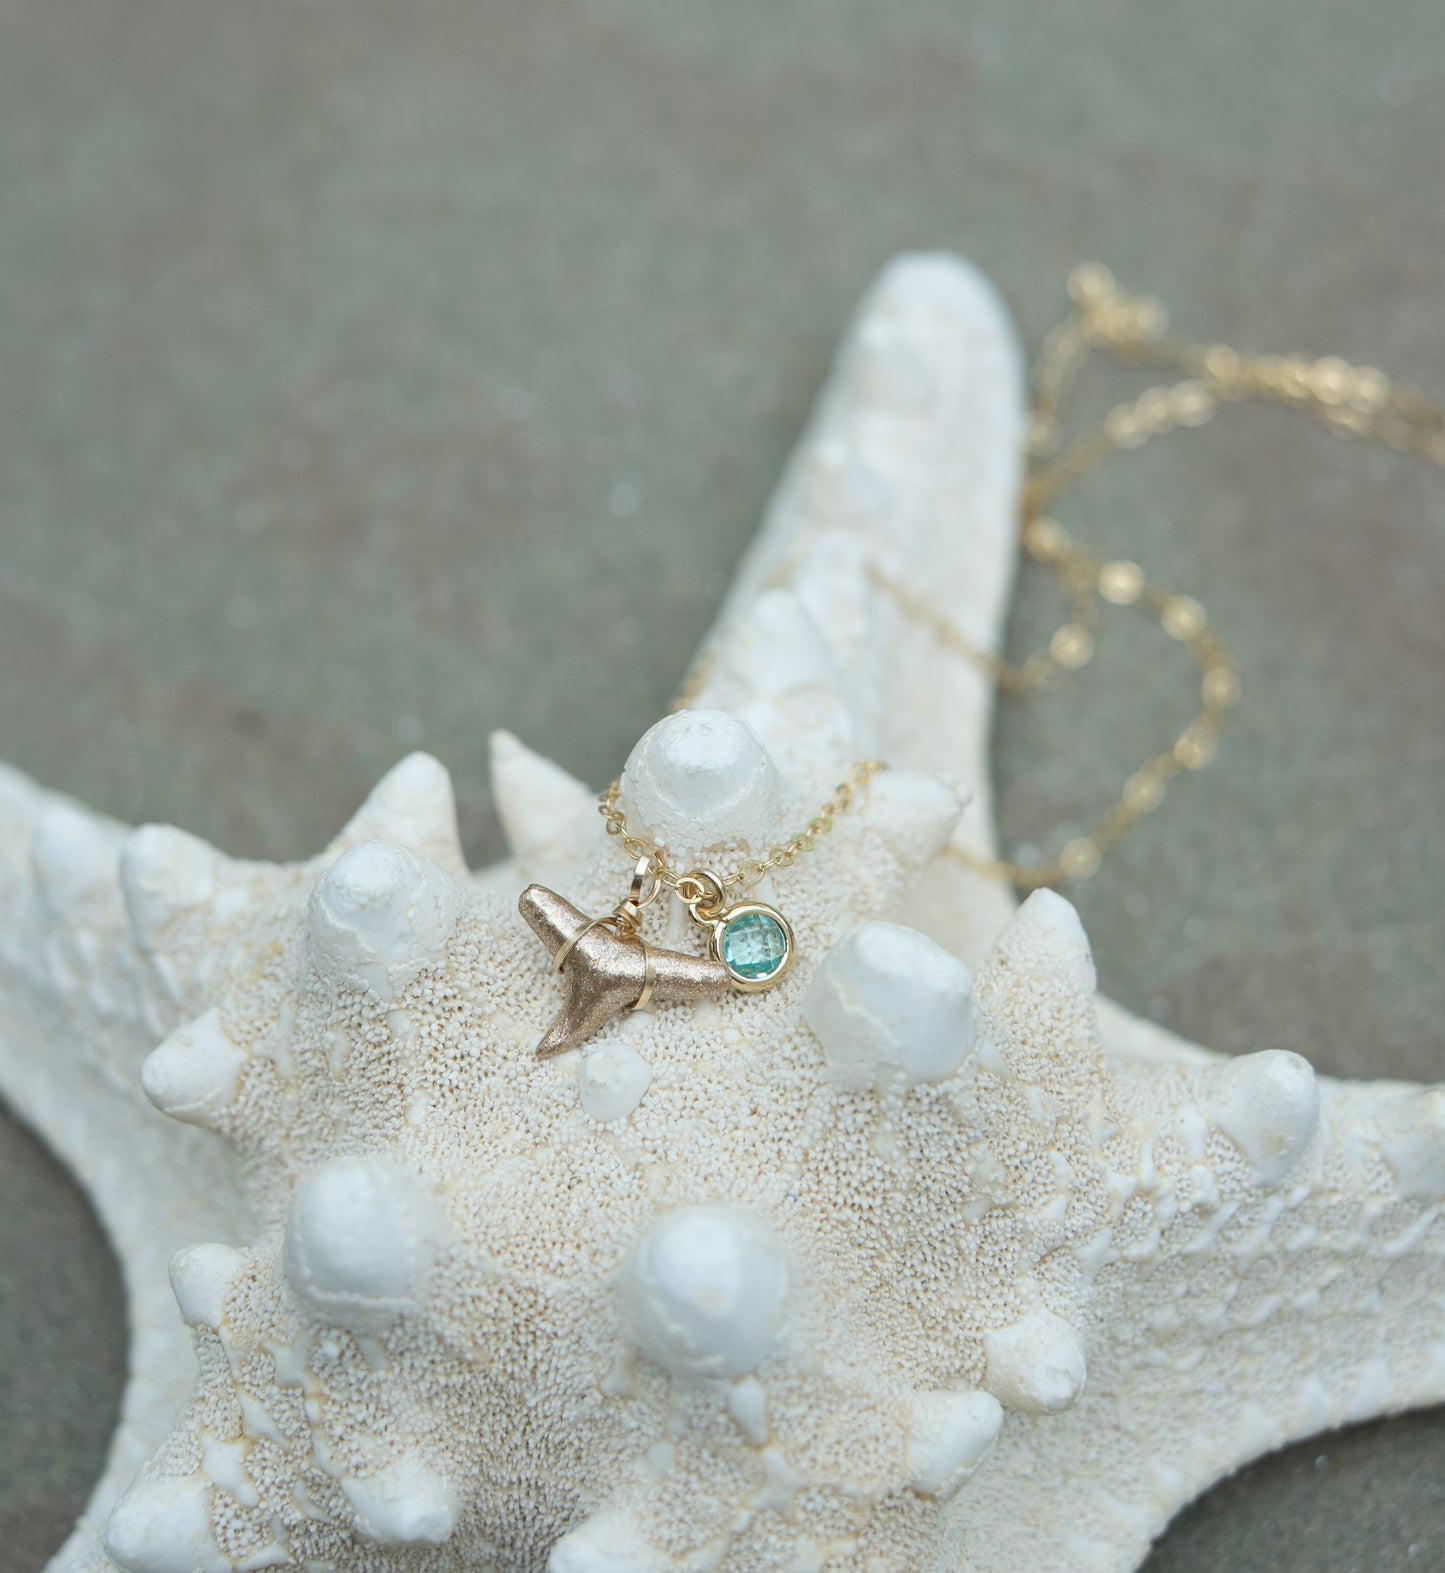 Sandy gold shark tooth necklace with aquamarine charm- Foxy Fossils